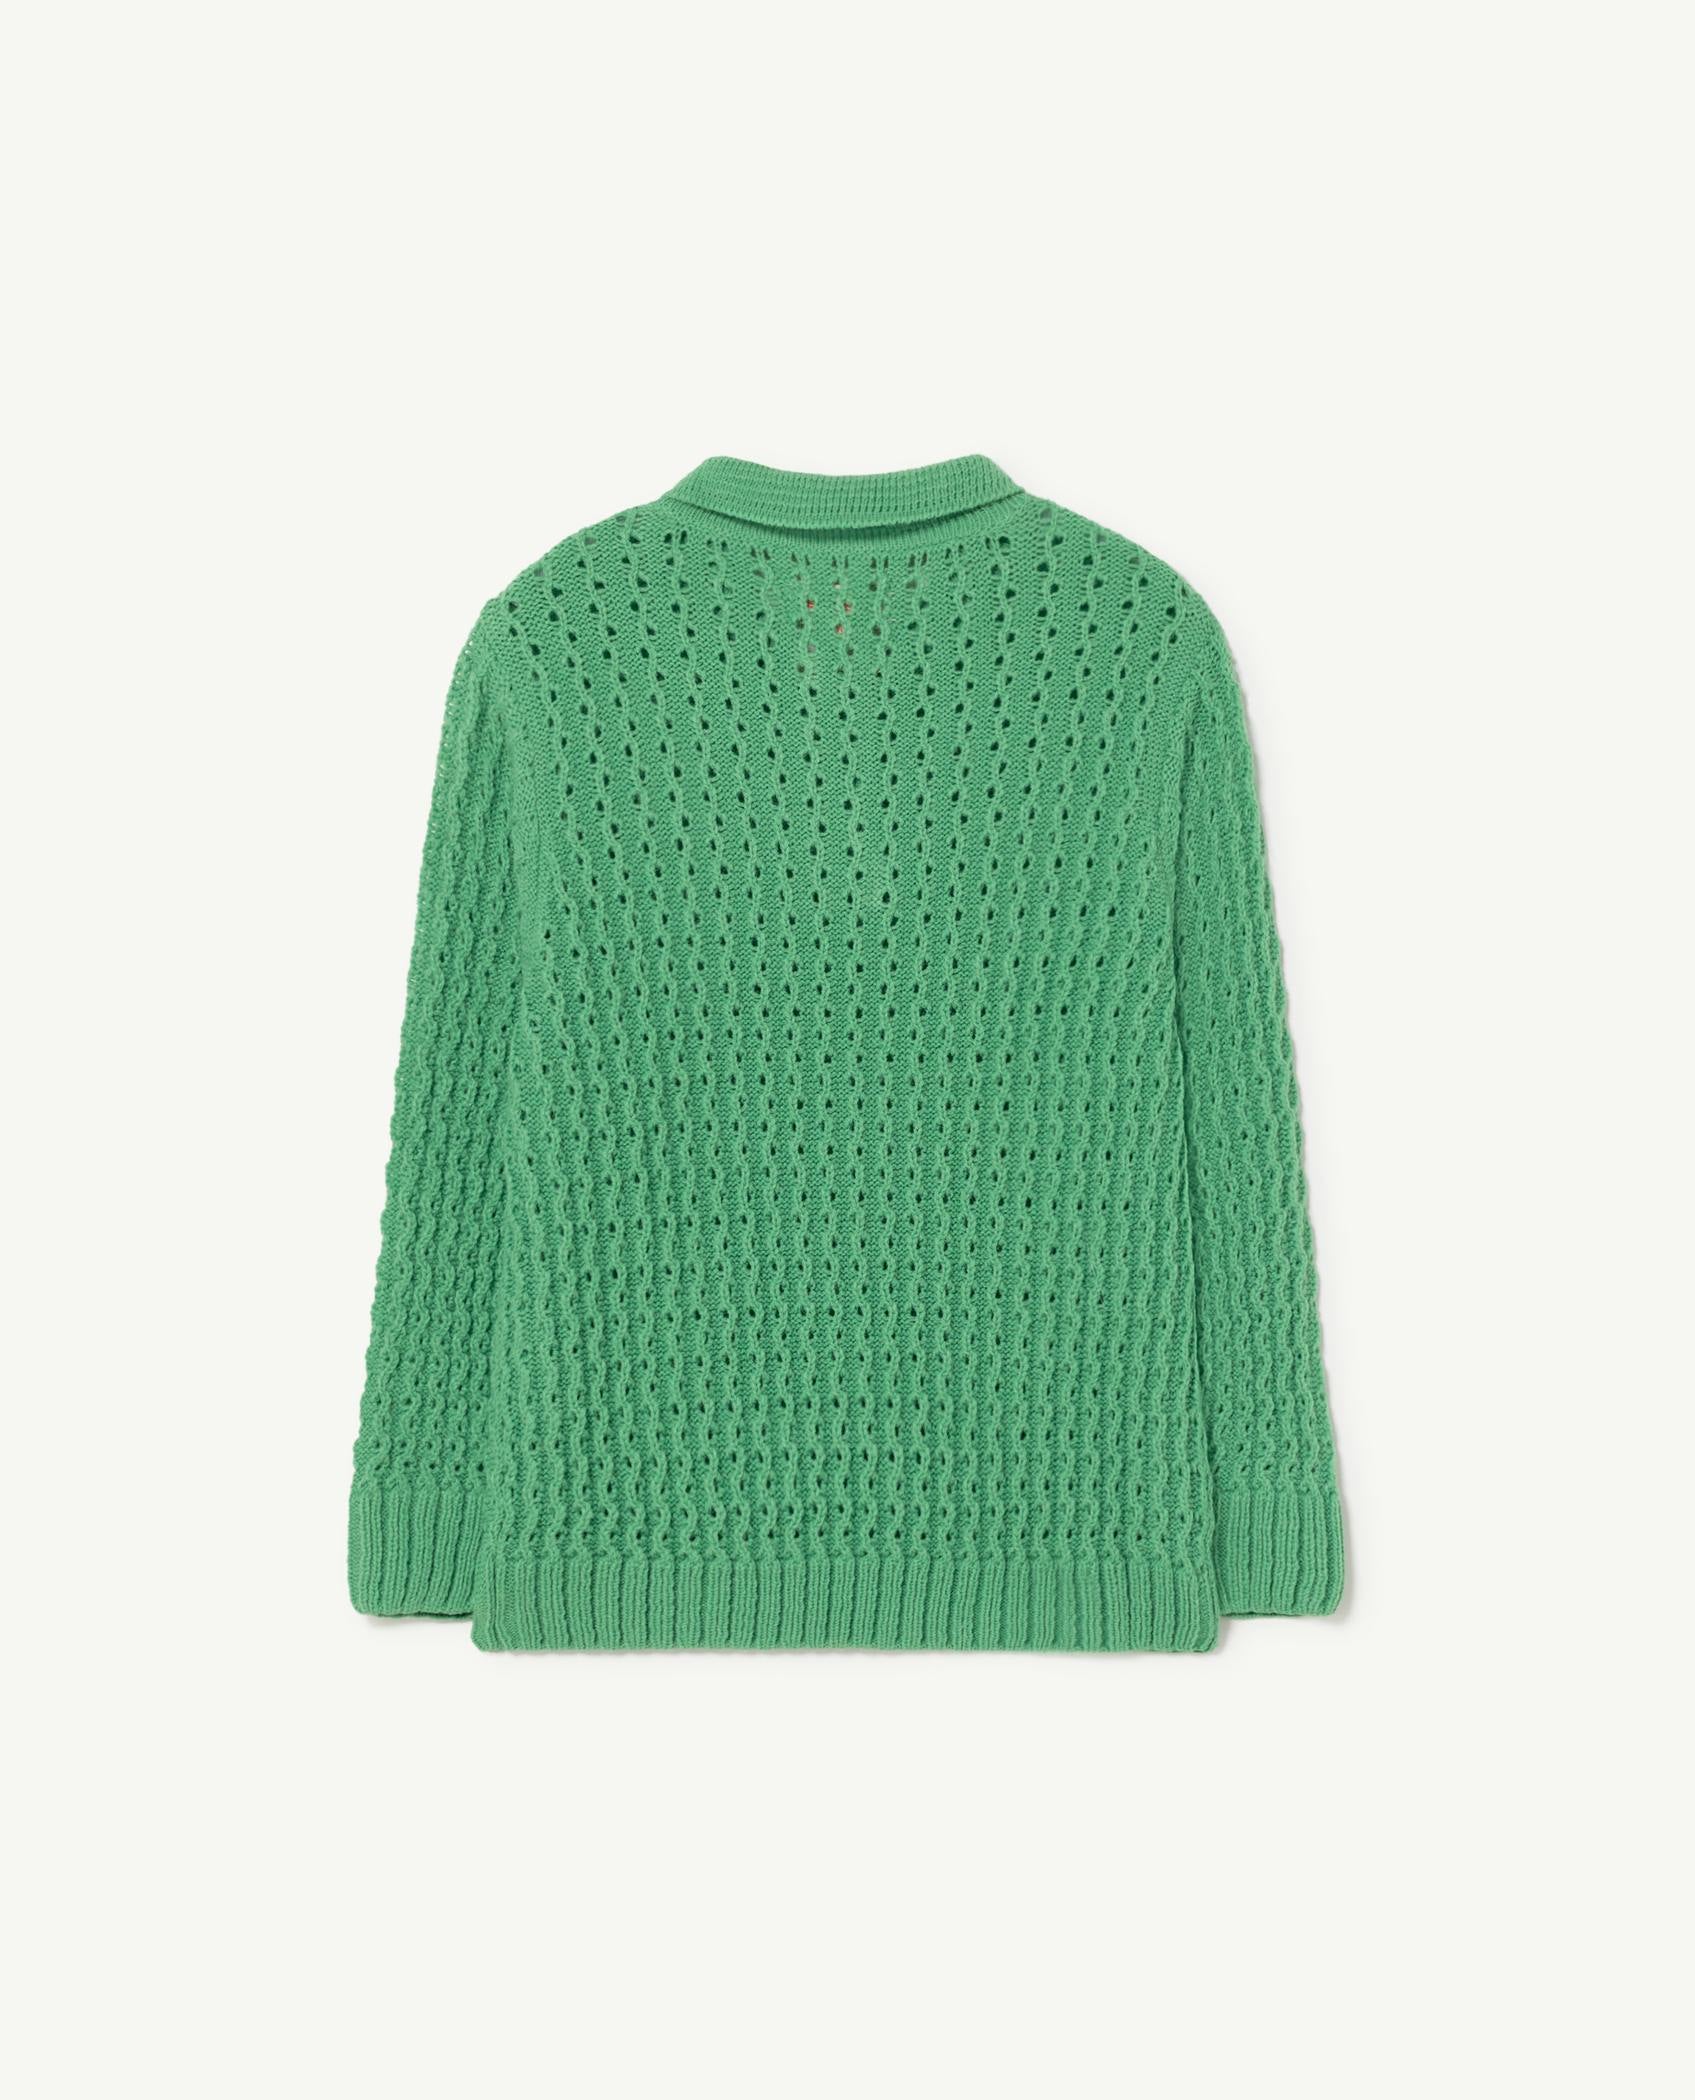 Soft Green Raven Kids Sweater PRODUCT BACK